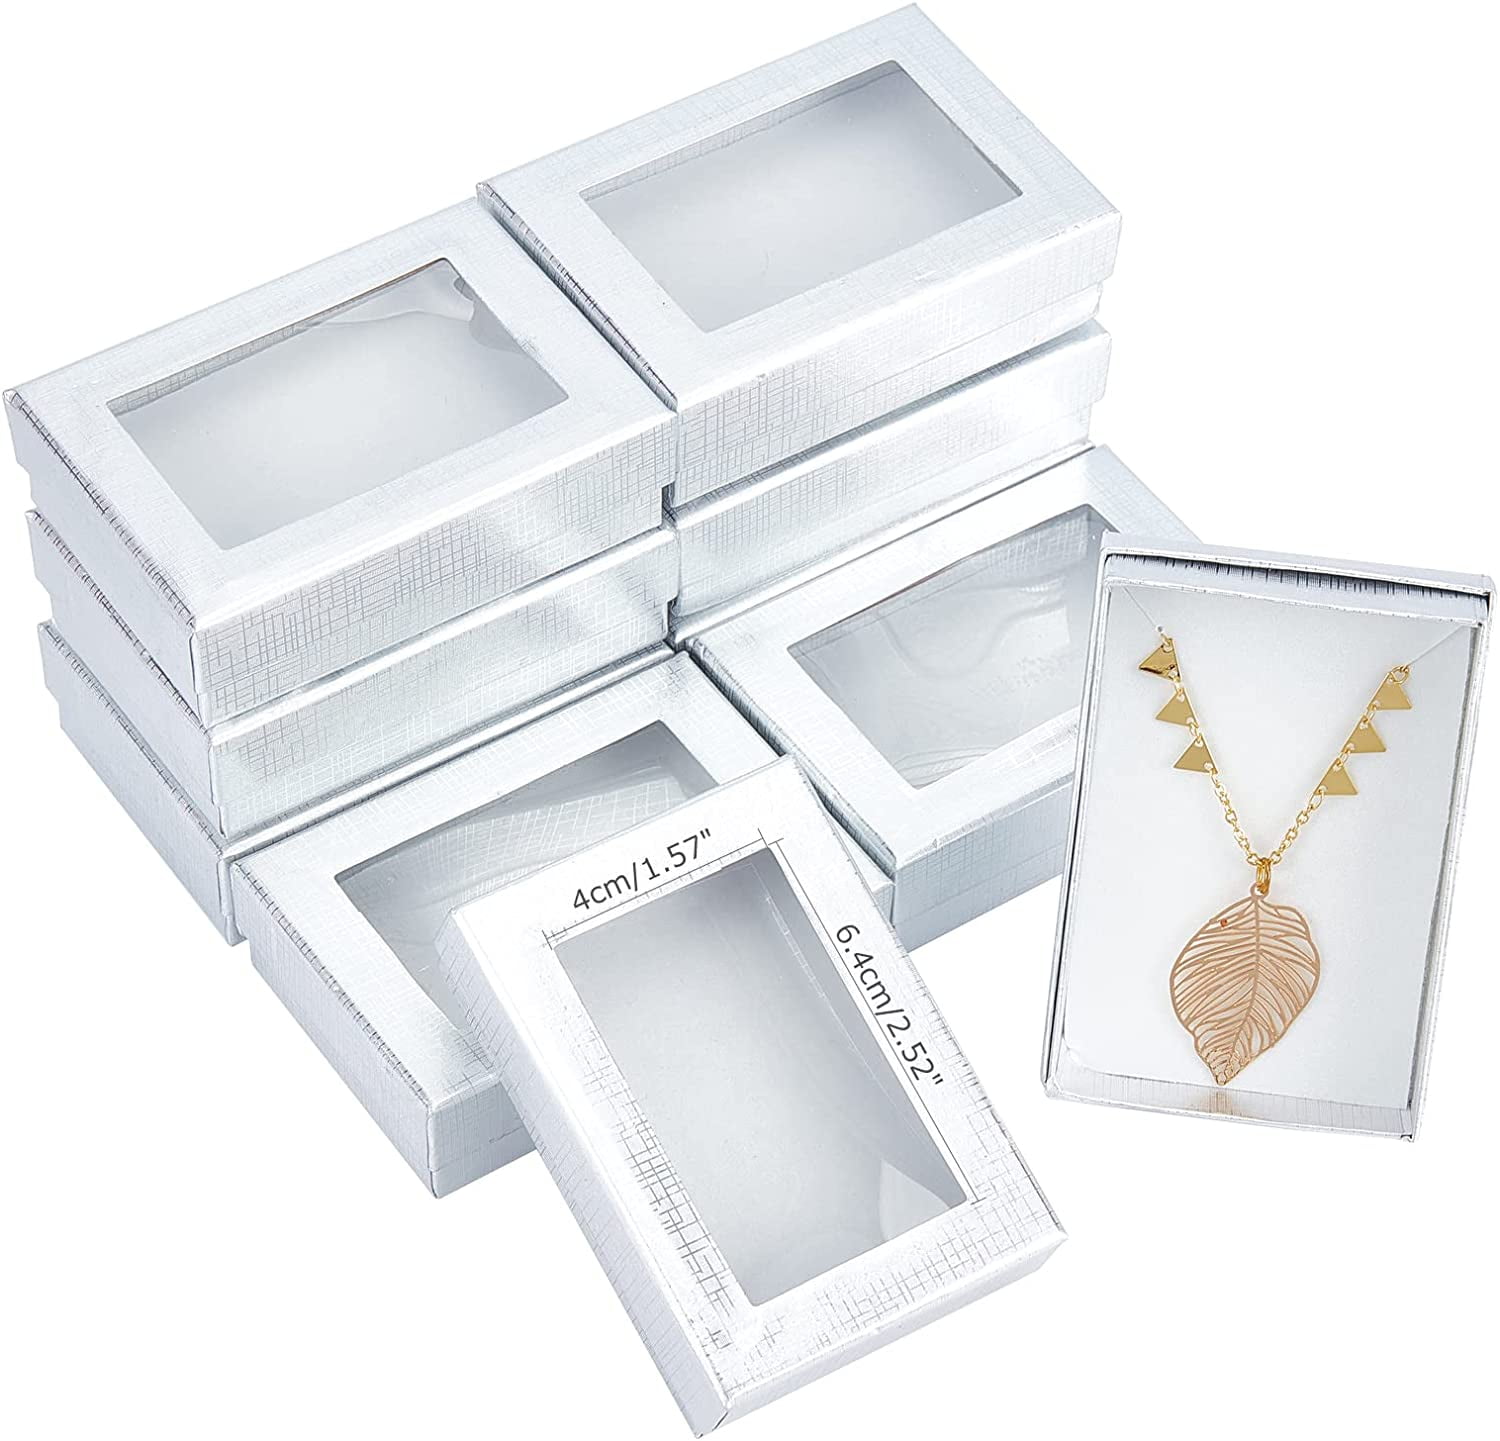 New Jewelry Packaging Box Earrings Necklace Holder Party Gift Box